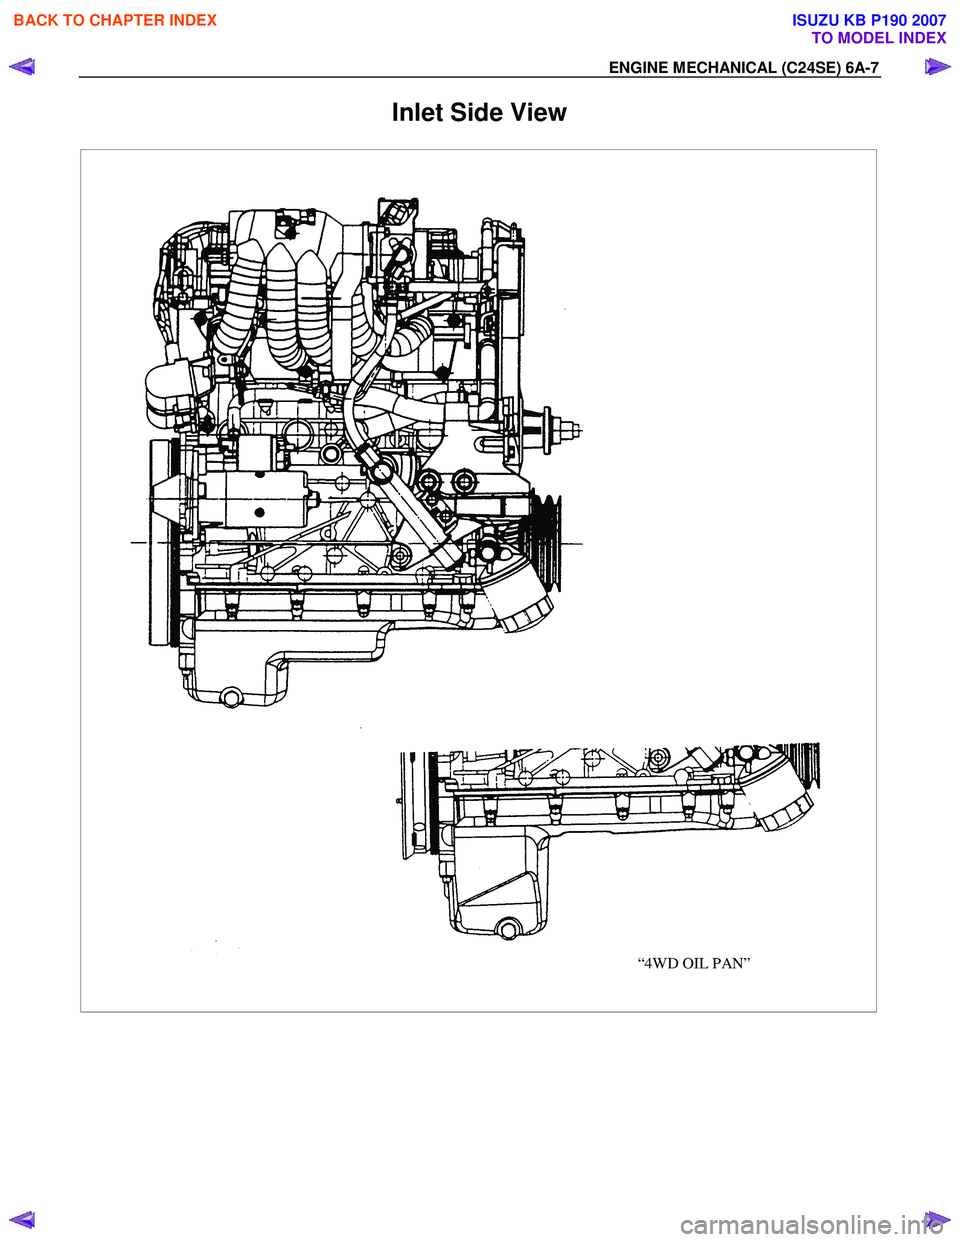 ISUZU KB P190 2007  Workshop Repair Manual ENGINE MECHANICAL (C24SE) 6A-7 
Inlet Side View 
“4WD OIL PAN”
 
 
BACK TO CHAPTER INDEX
TO MODEL INDEX
ISUZU KB P190 2007 